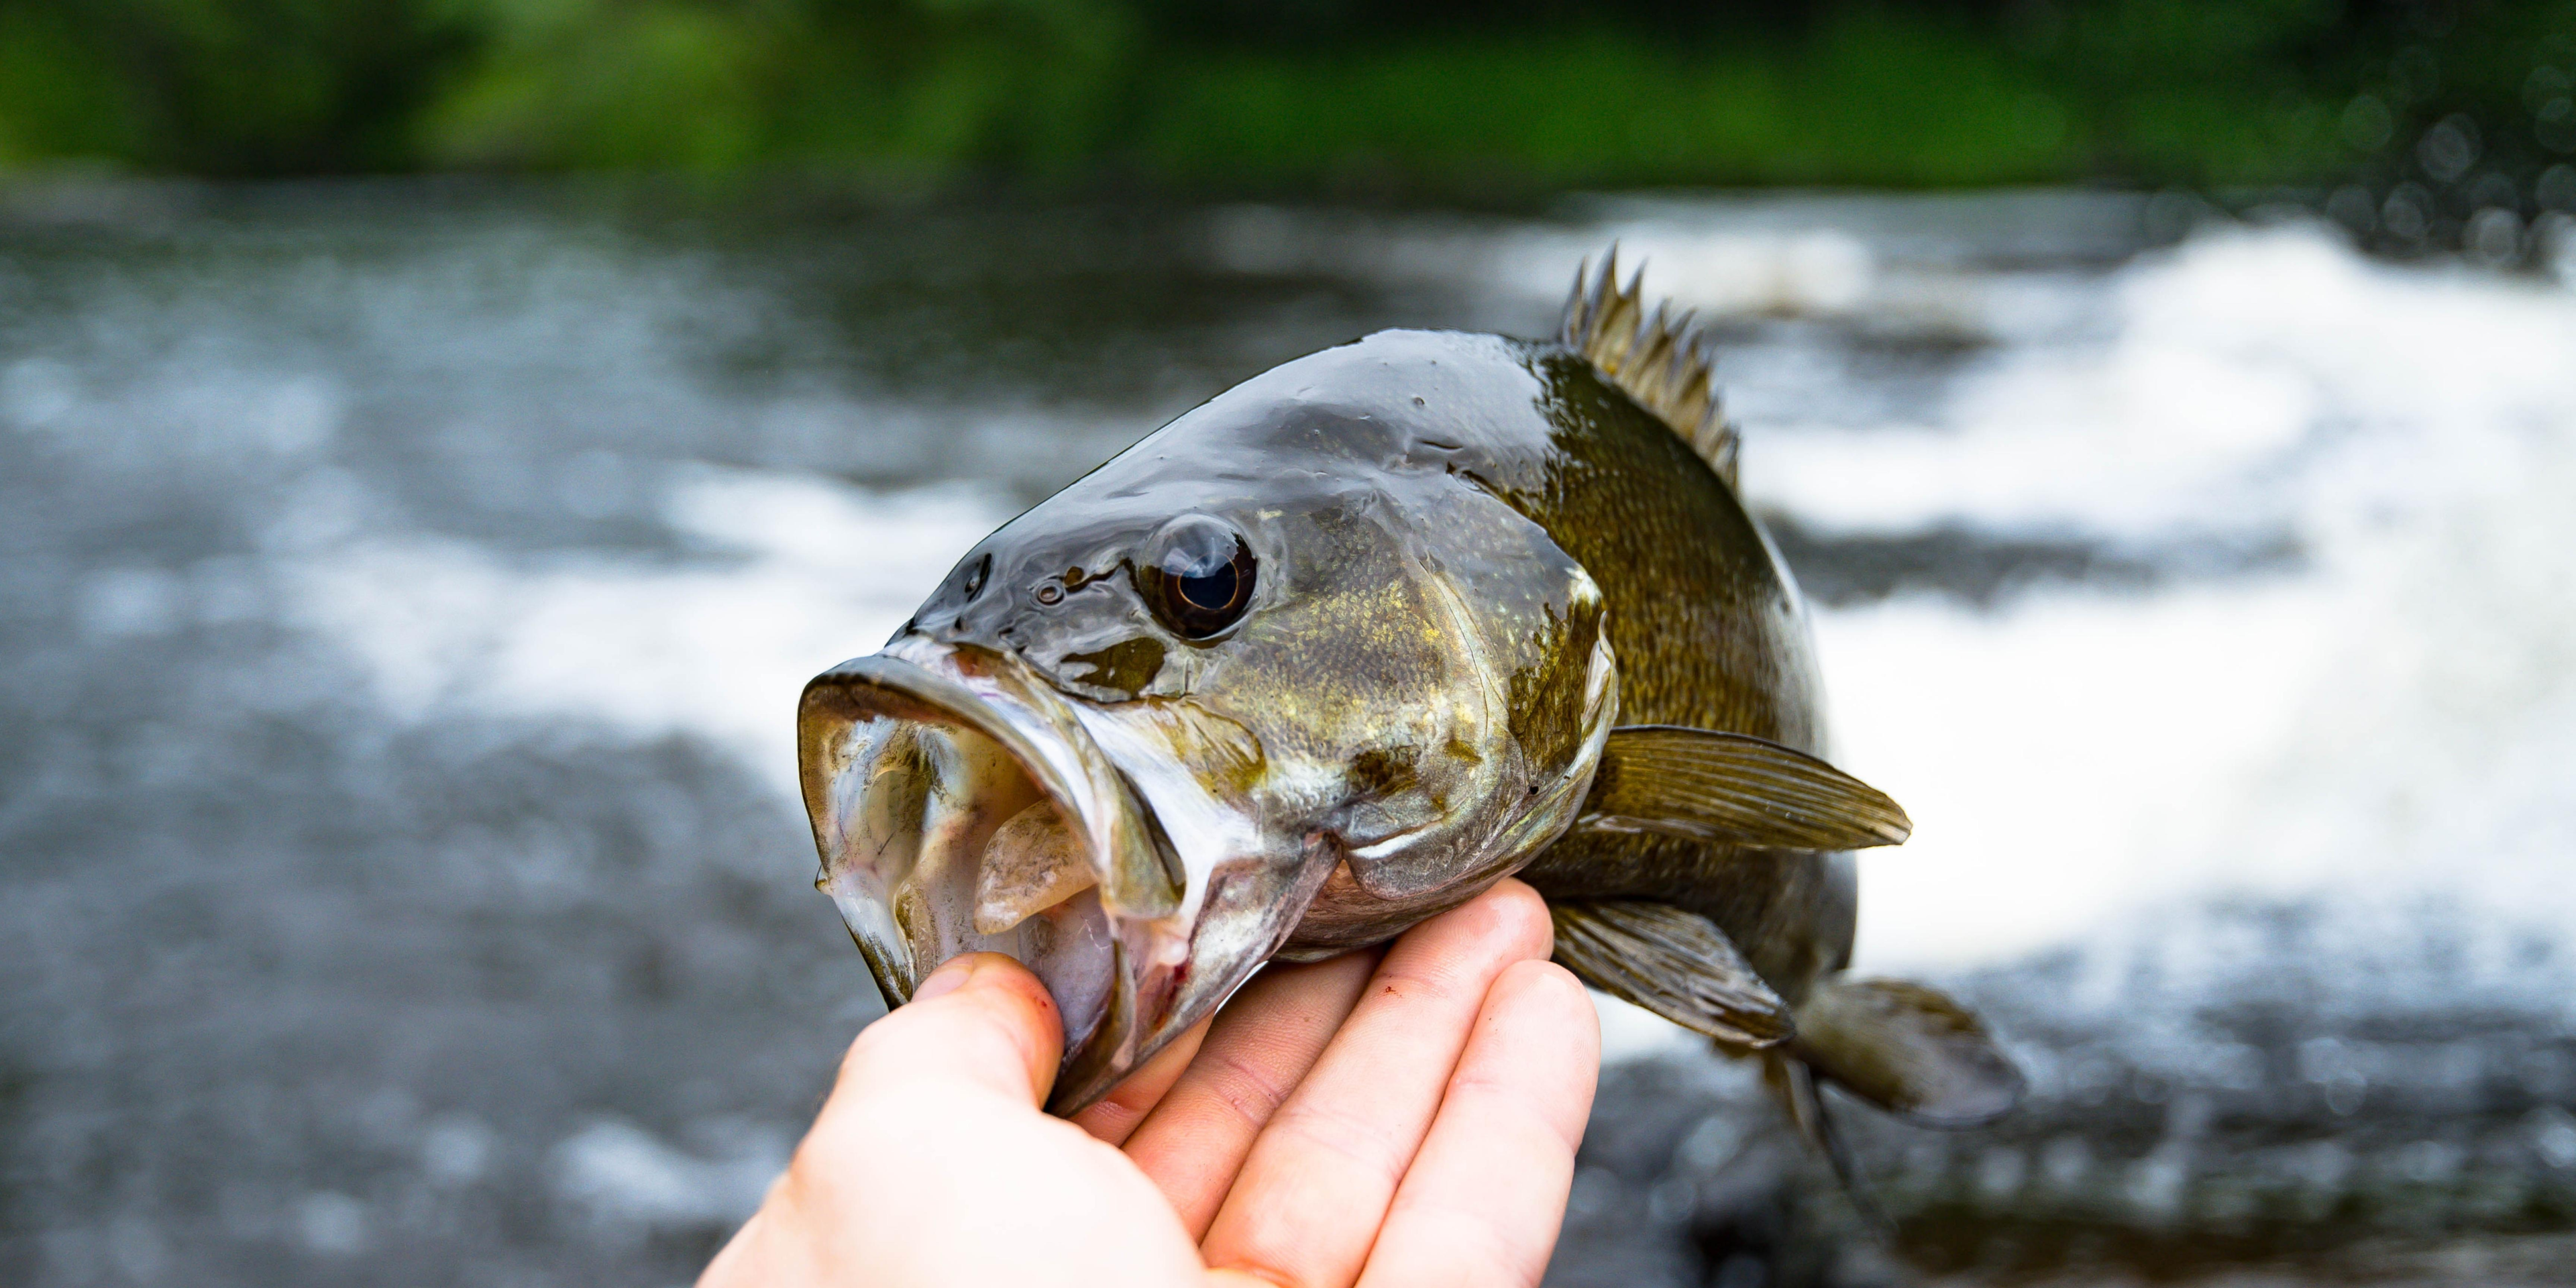 Your Guide to Catching Bass - Best Bass Lures